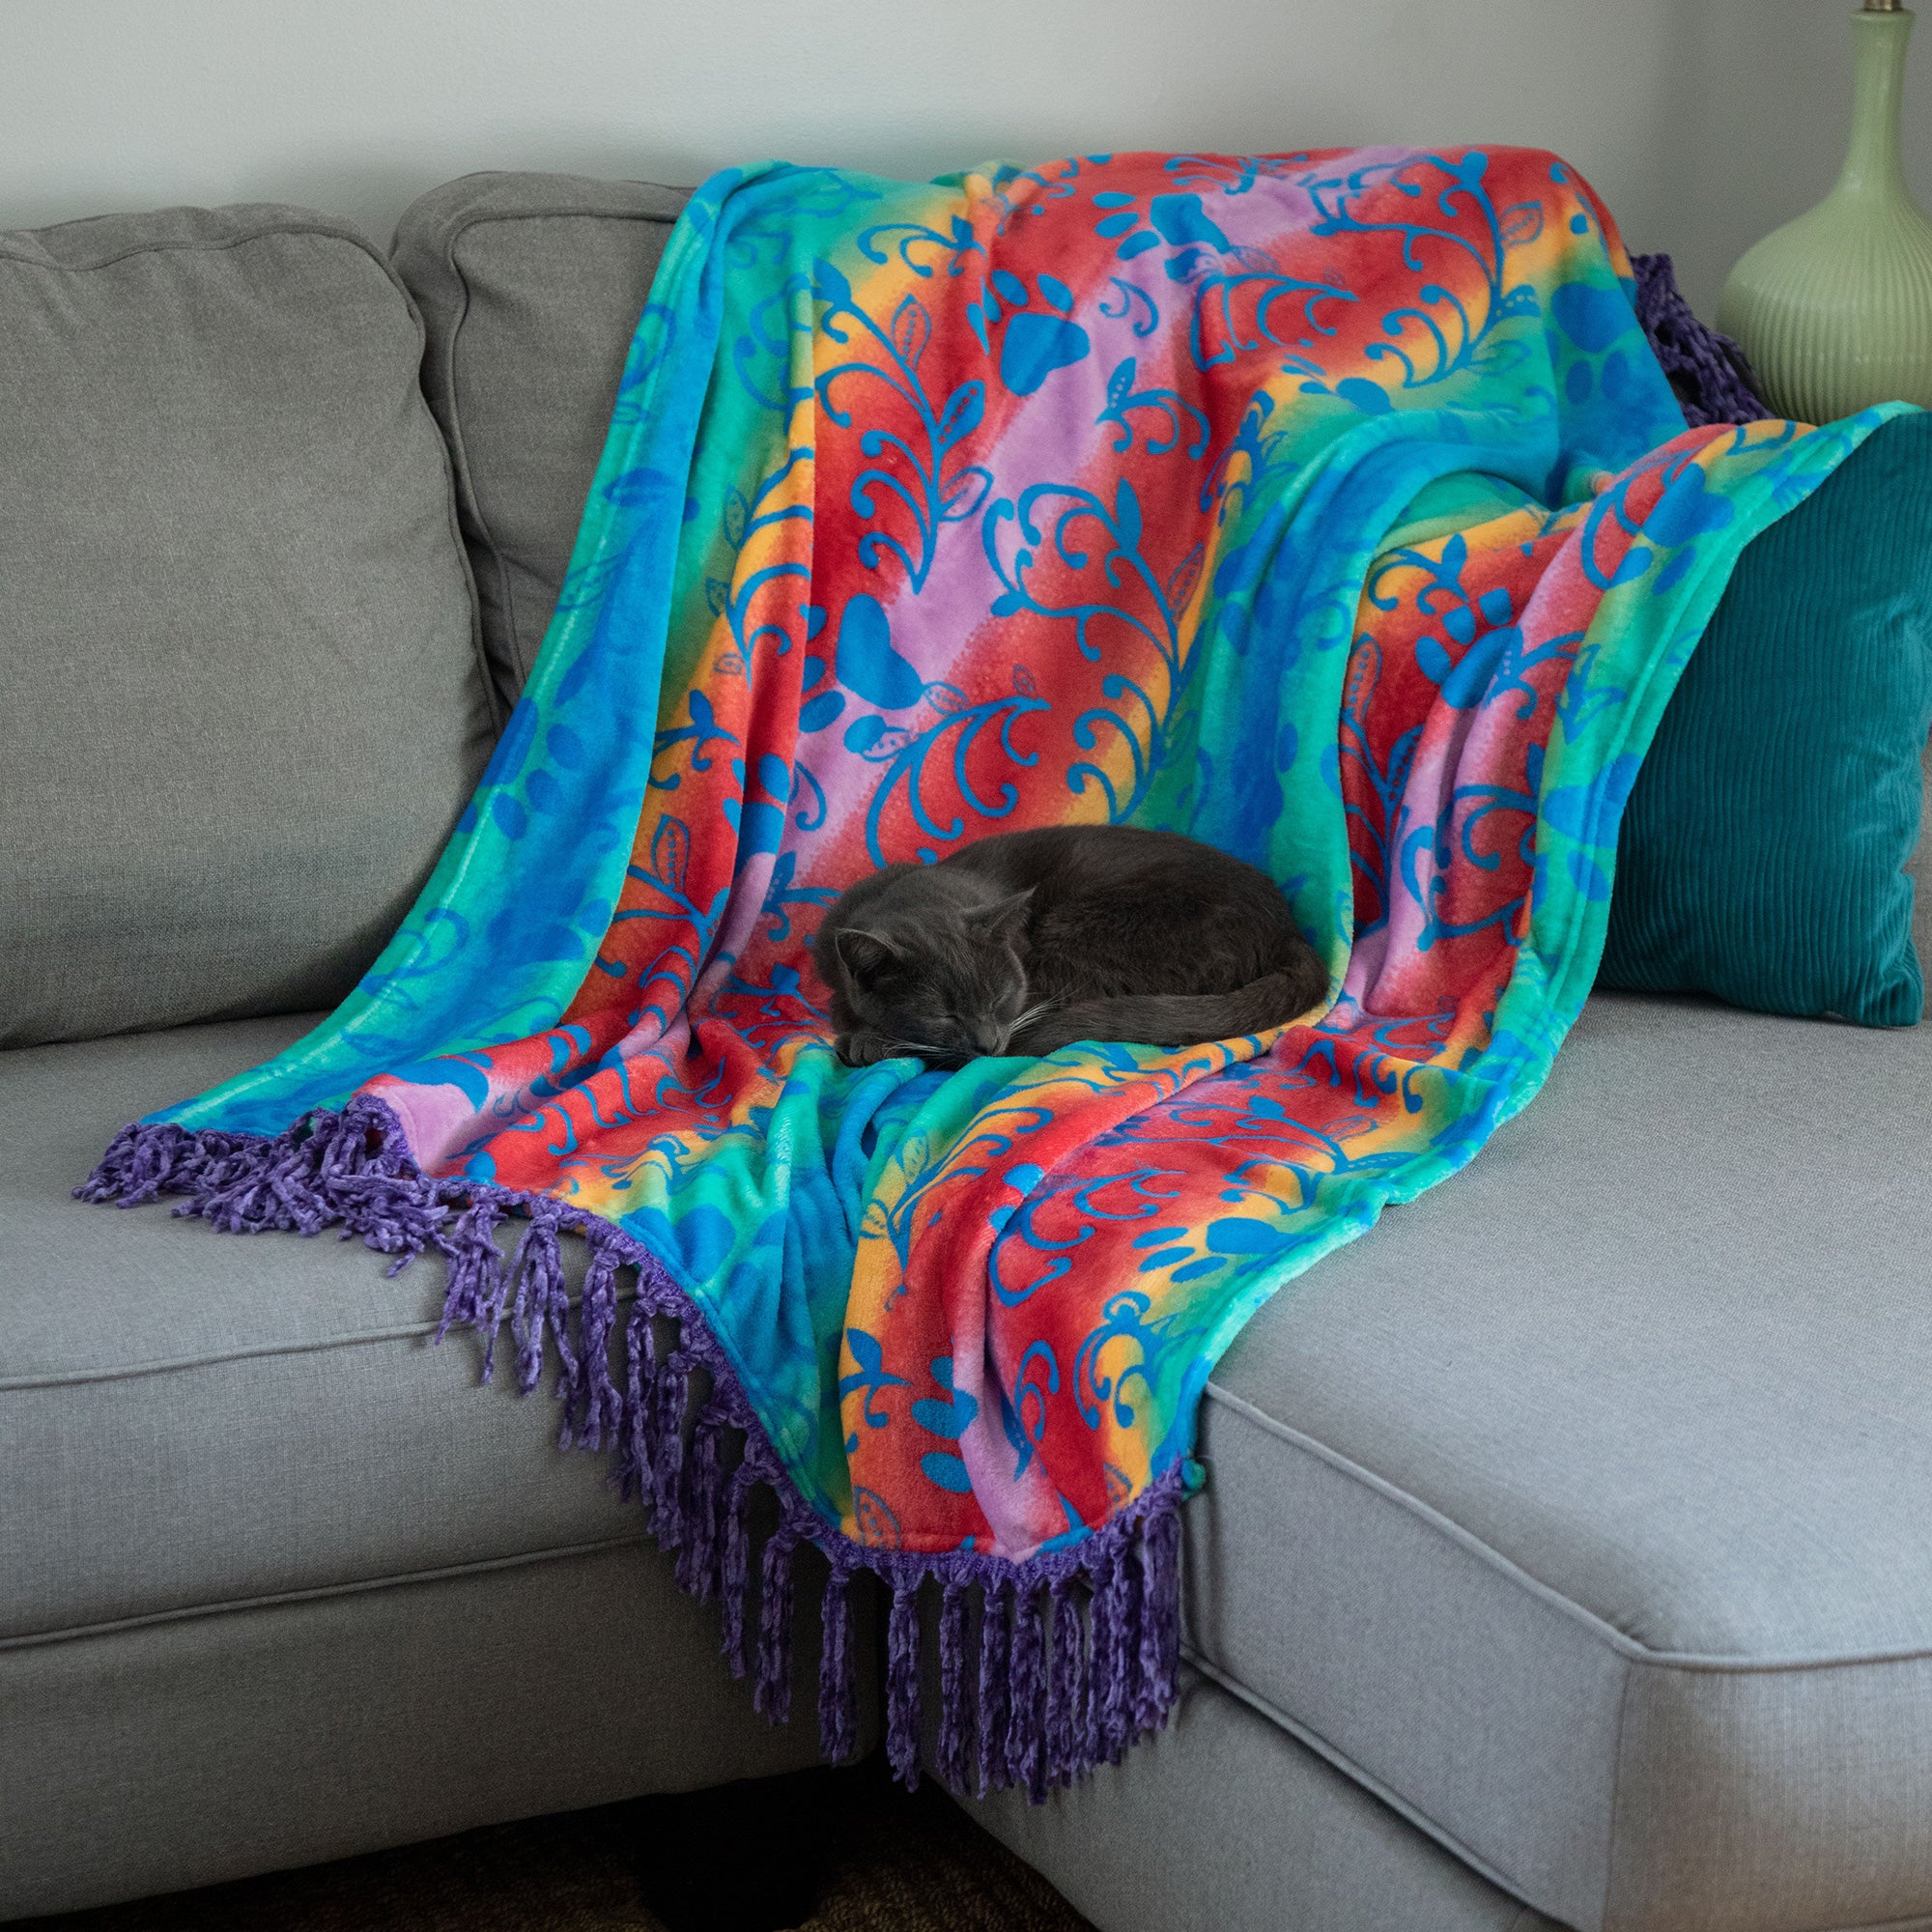 Super Cozy™ Paws Throw Blanket With Fringe - Sunset Paws